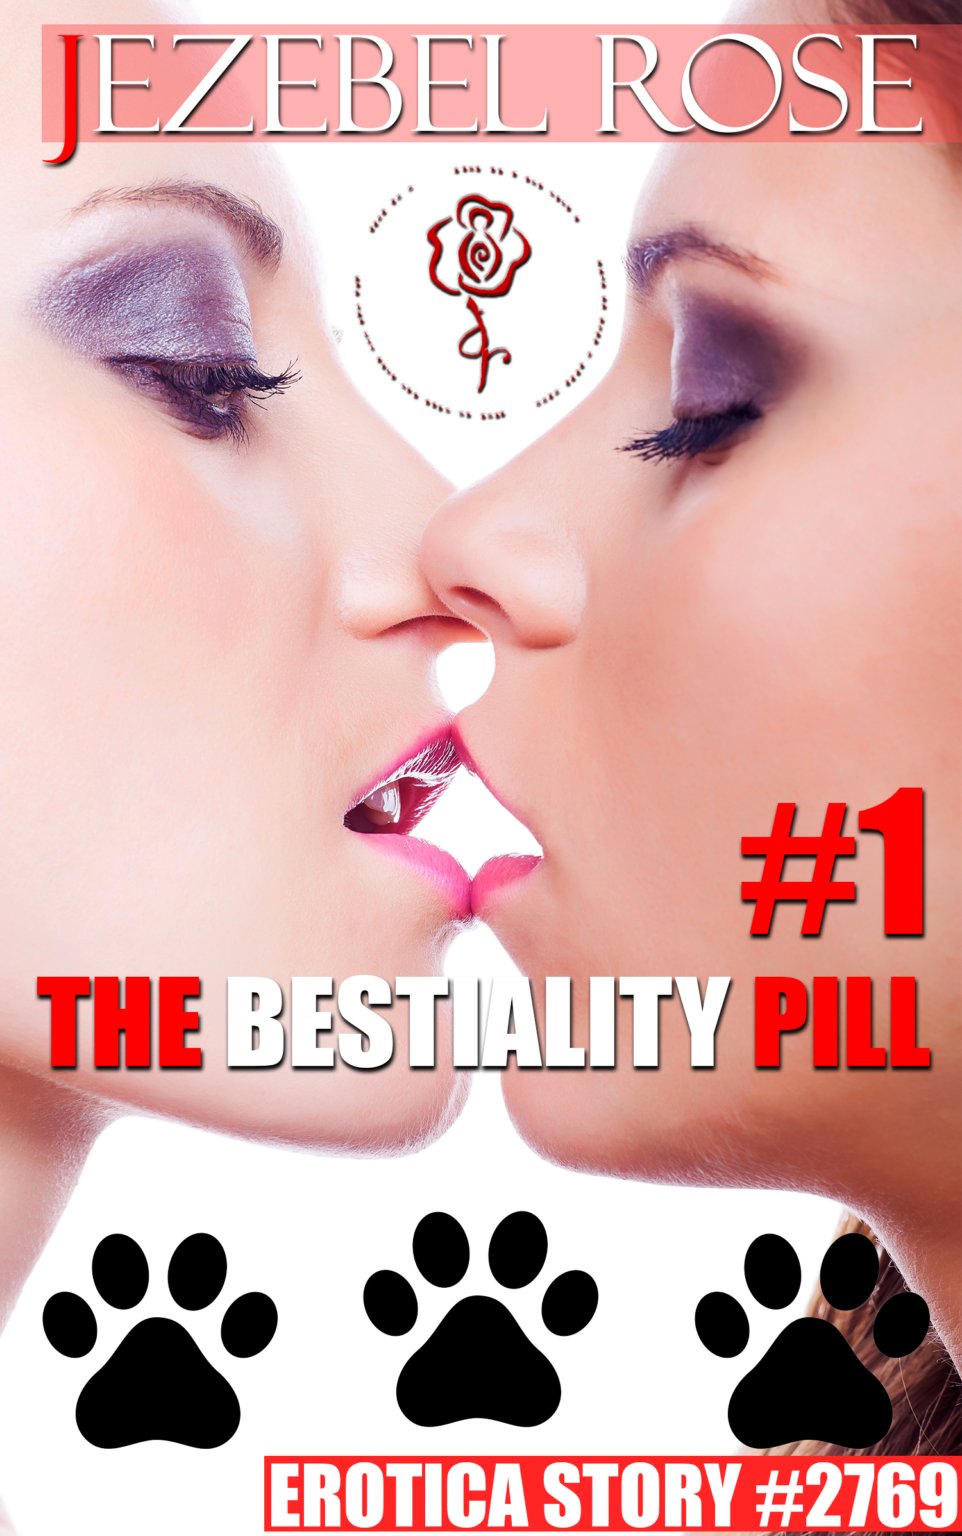 The Bestiality Pill 1 ebook cover by Jezebel Rose